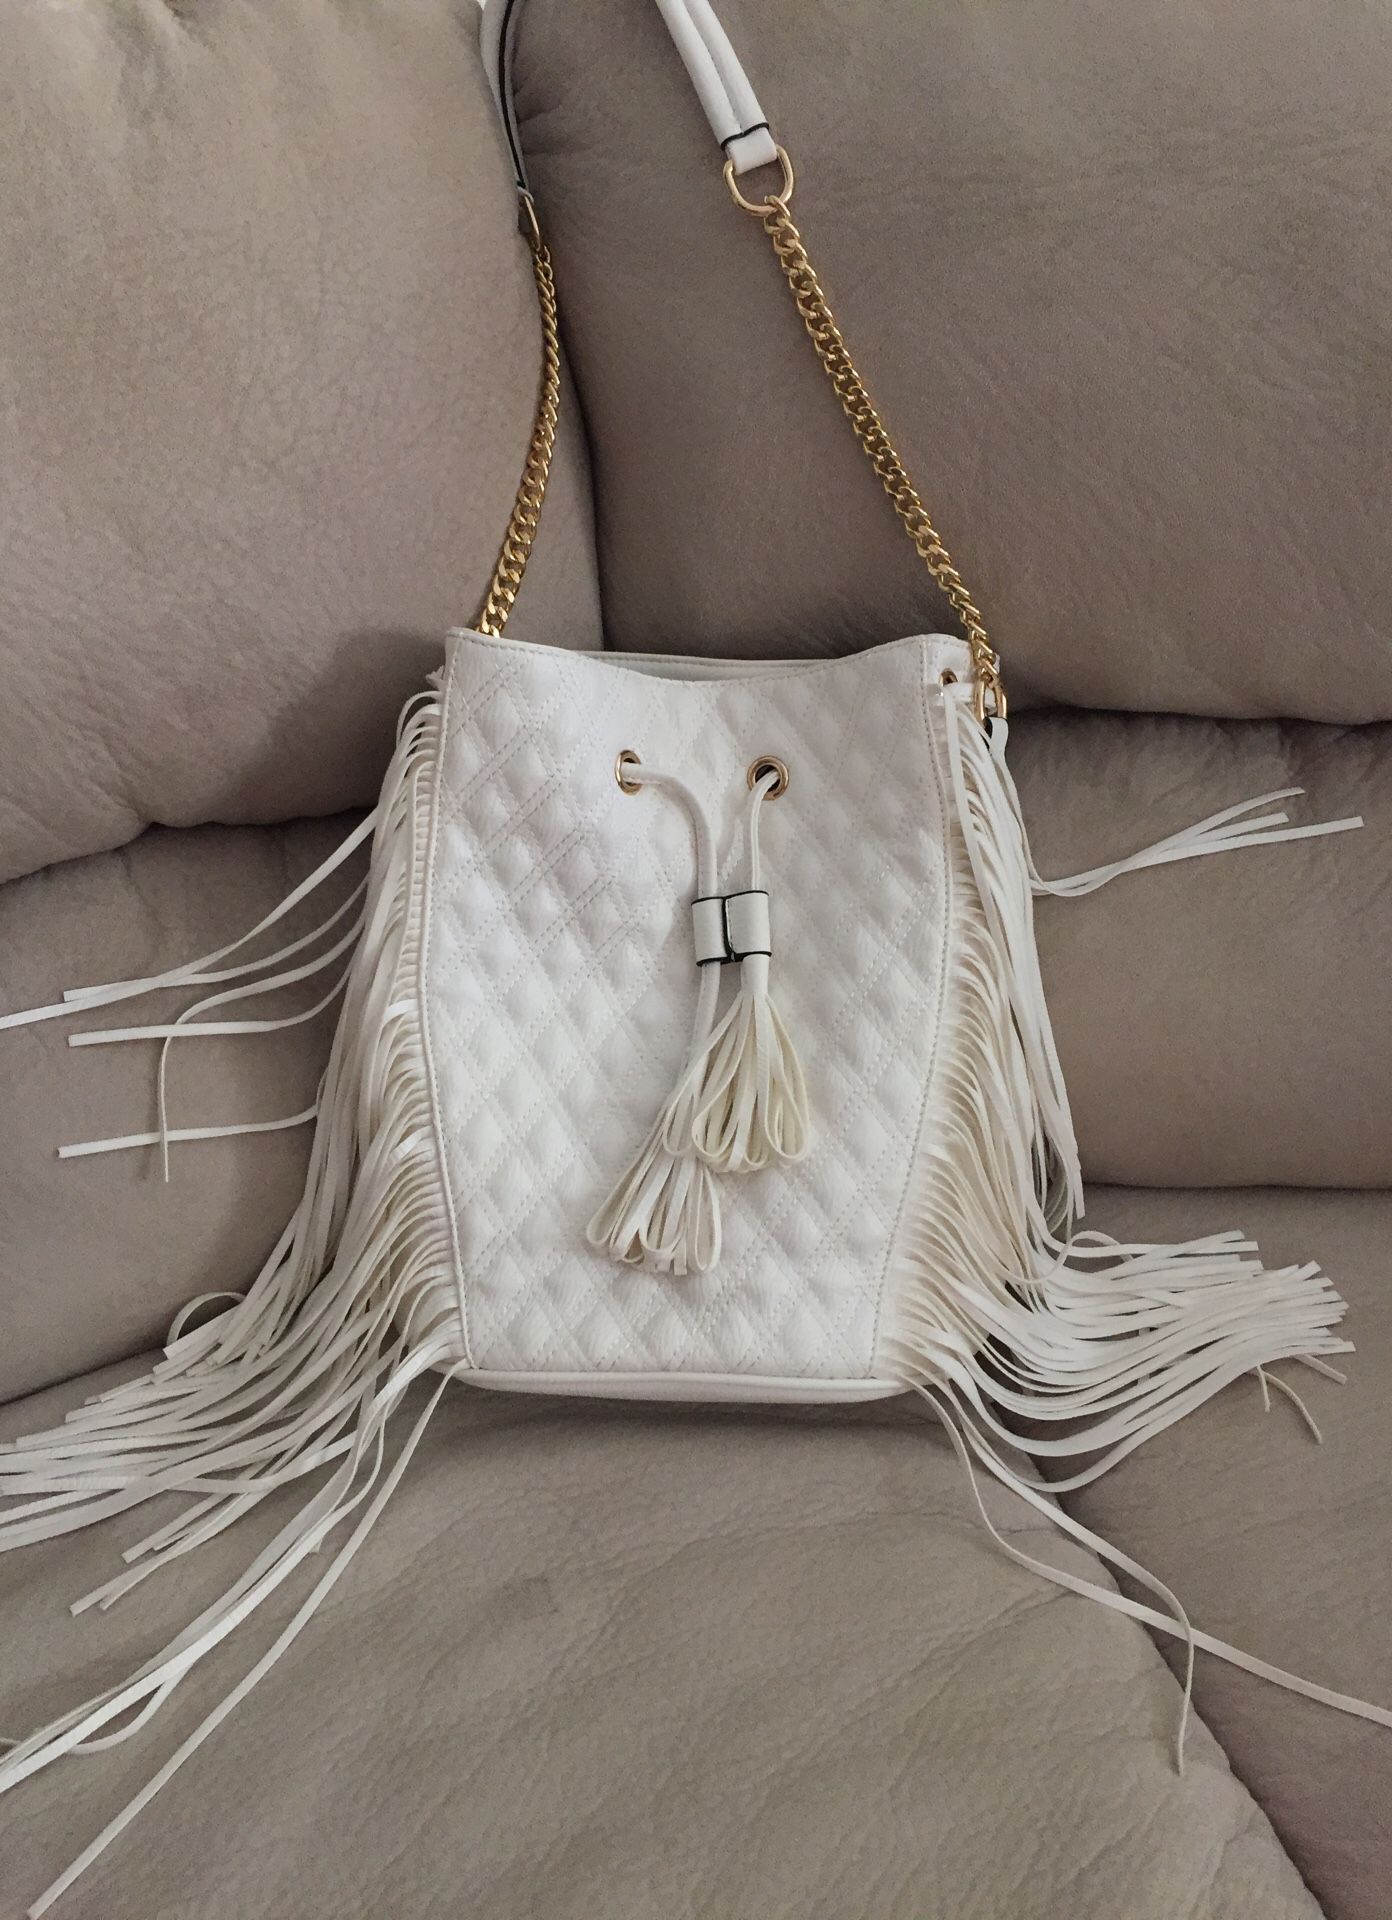 Brand new white & gold tote bag with heavy fringes